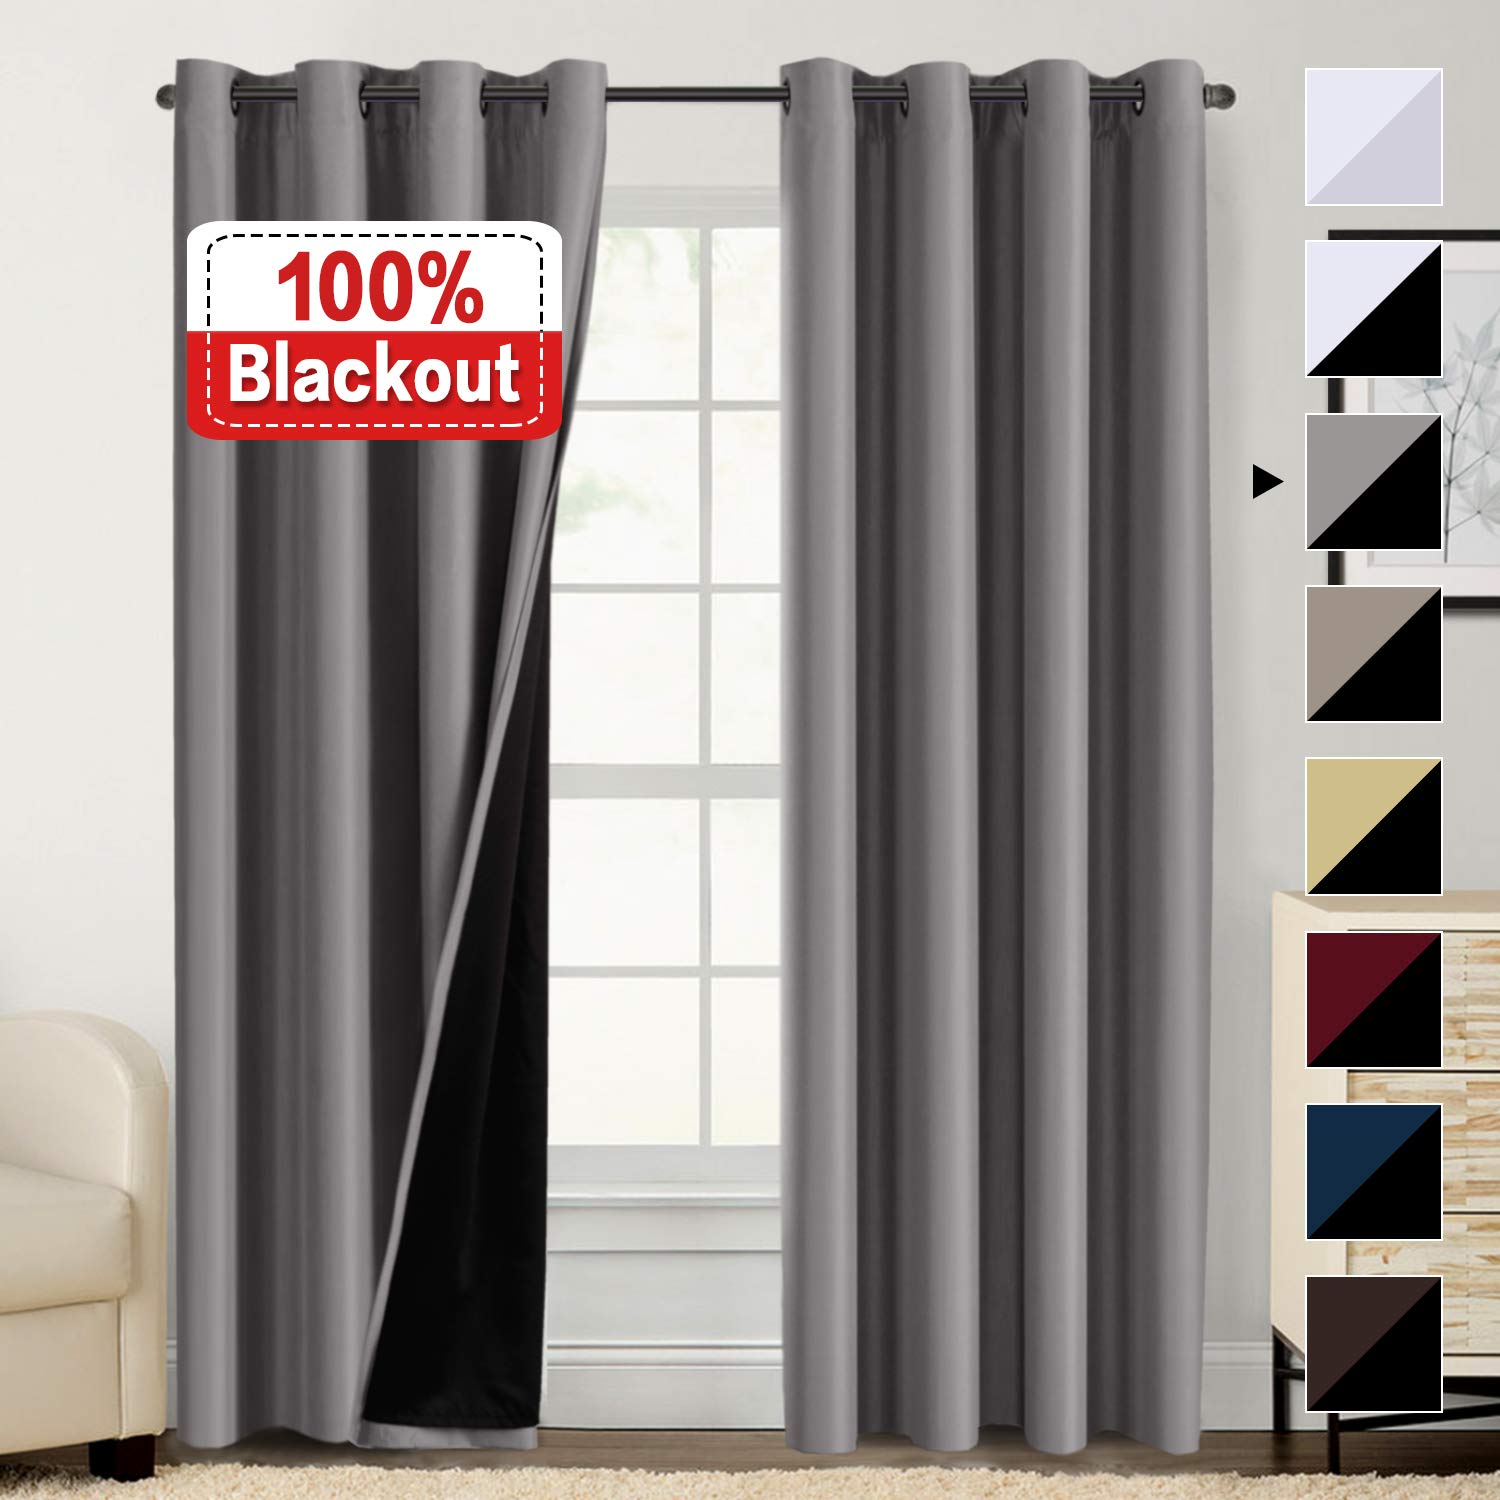 Flamingo P 100% Blackout Curtains for Bedroom